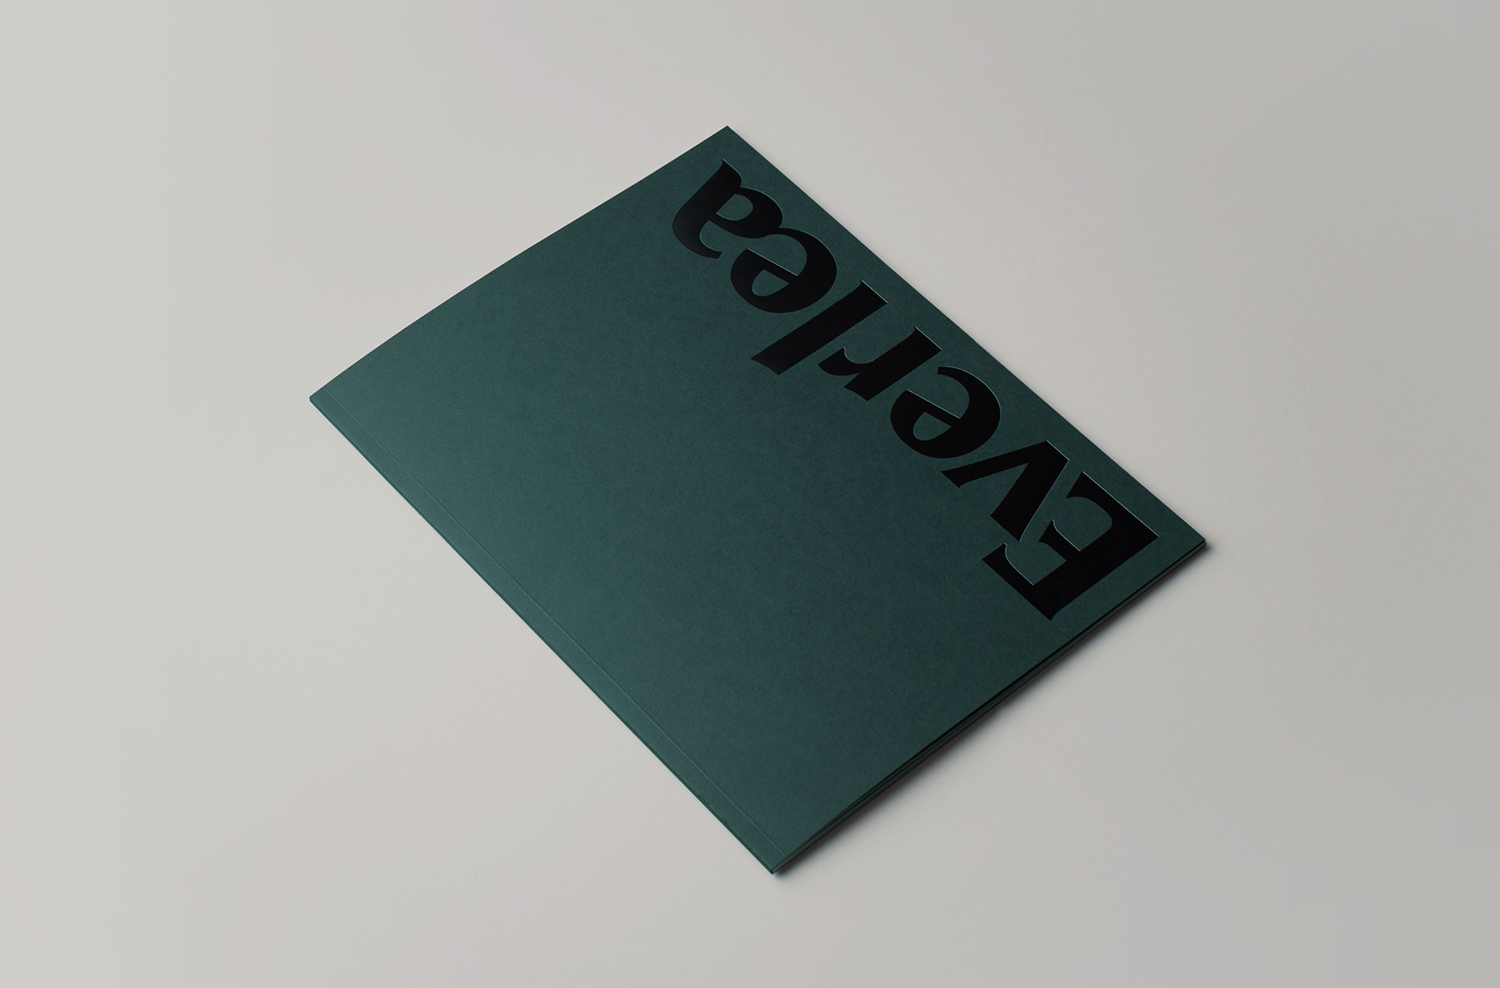 Logotype and black block foiled brochure cover by Studio Brave for Melbourne property development Everlea